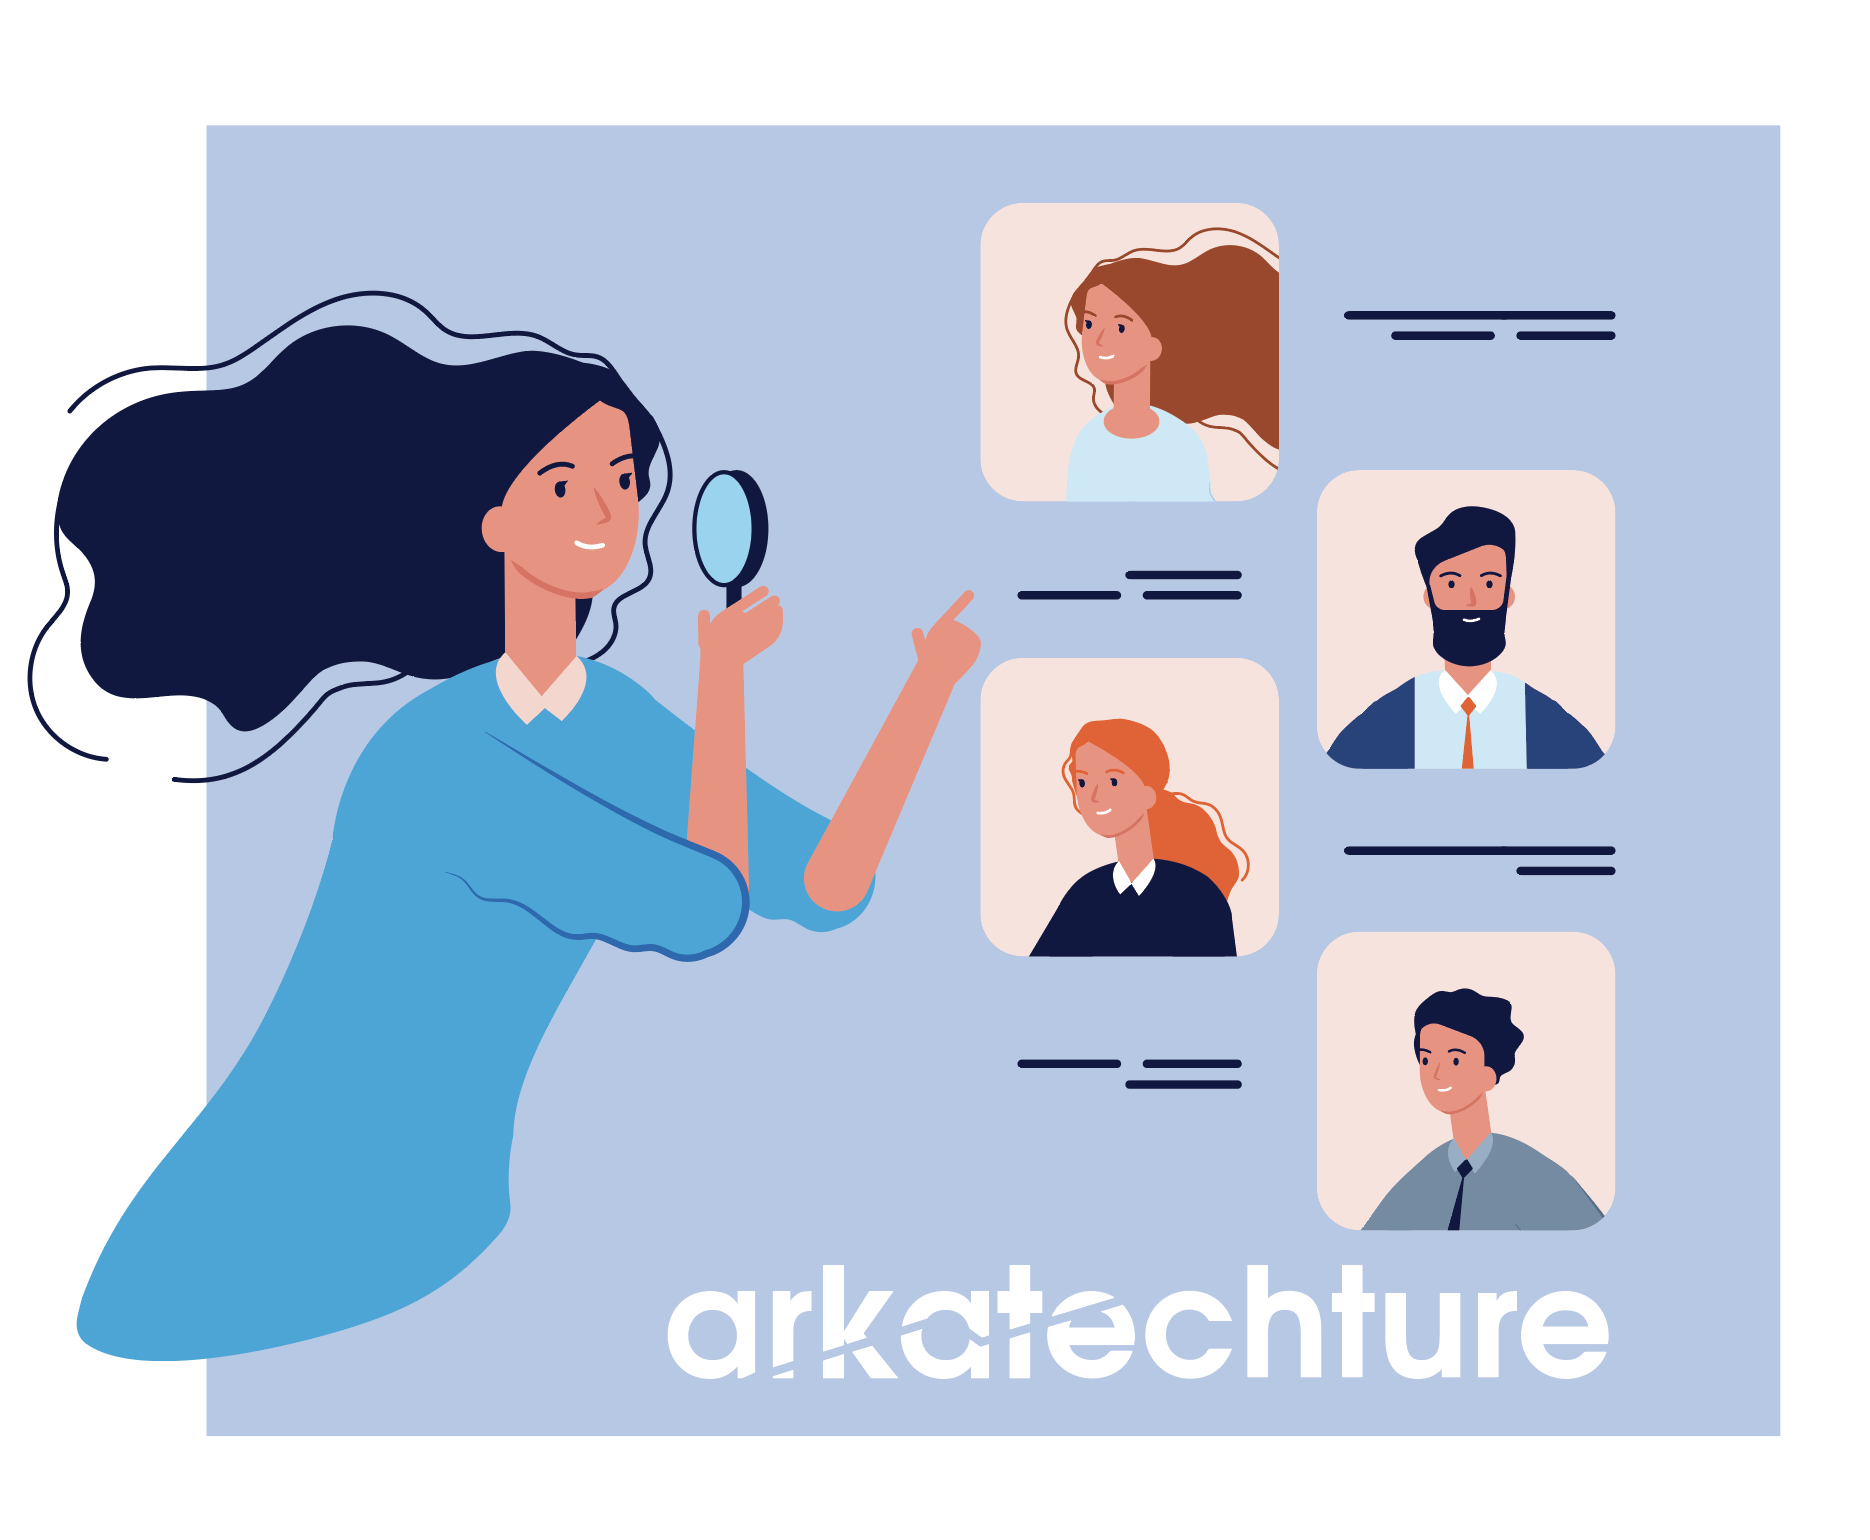 Why Arkatechture Requires a Cover Letter: A People Operations Manager Perspective